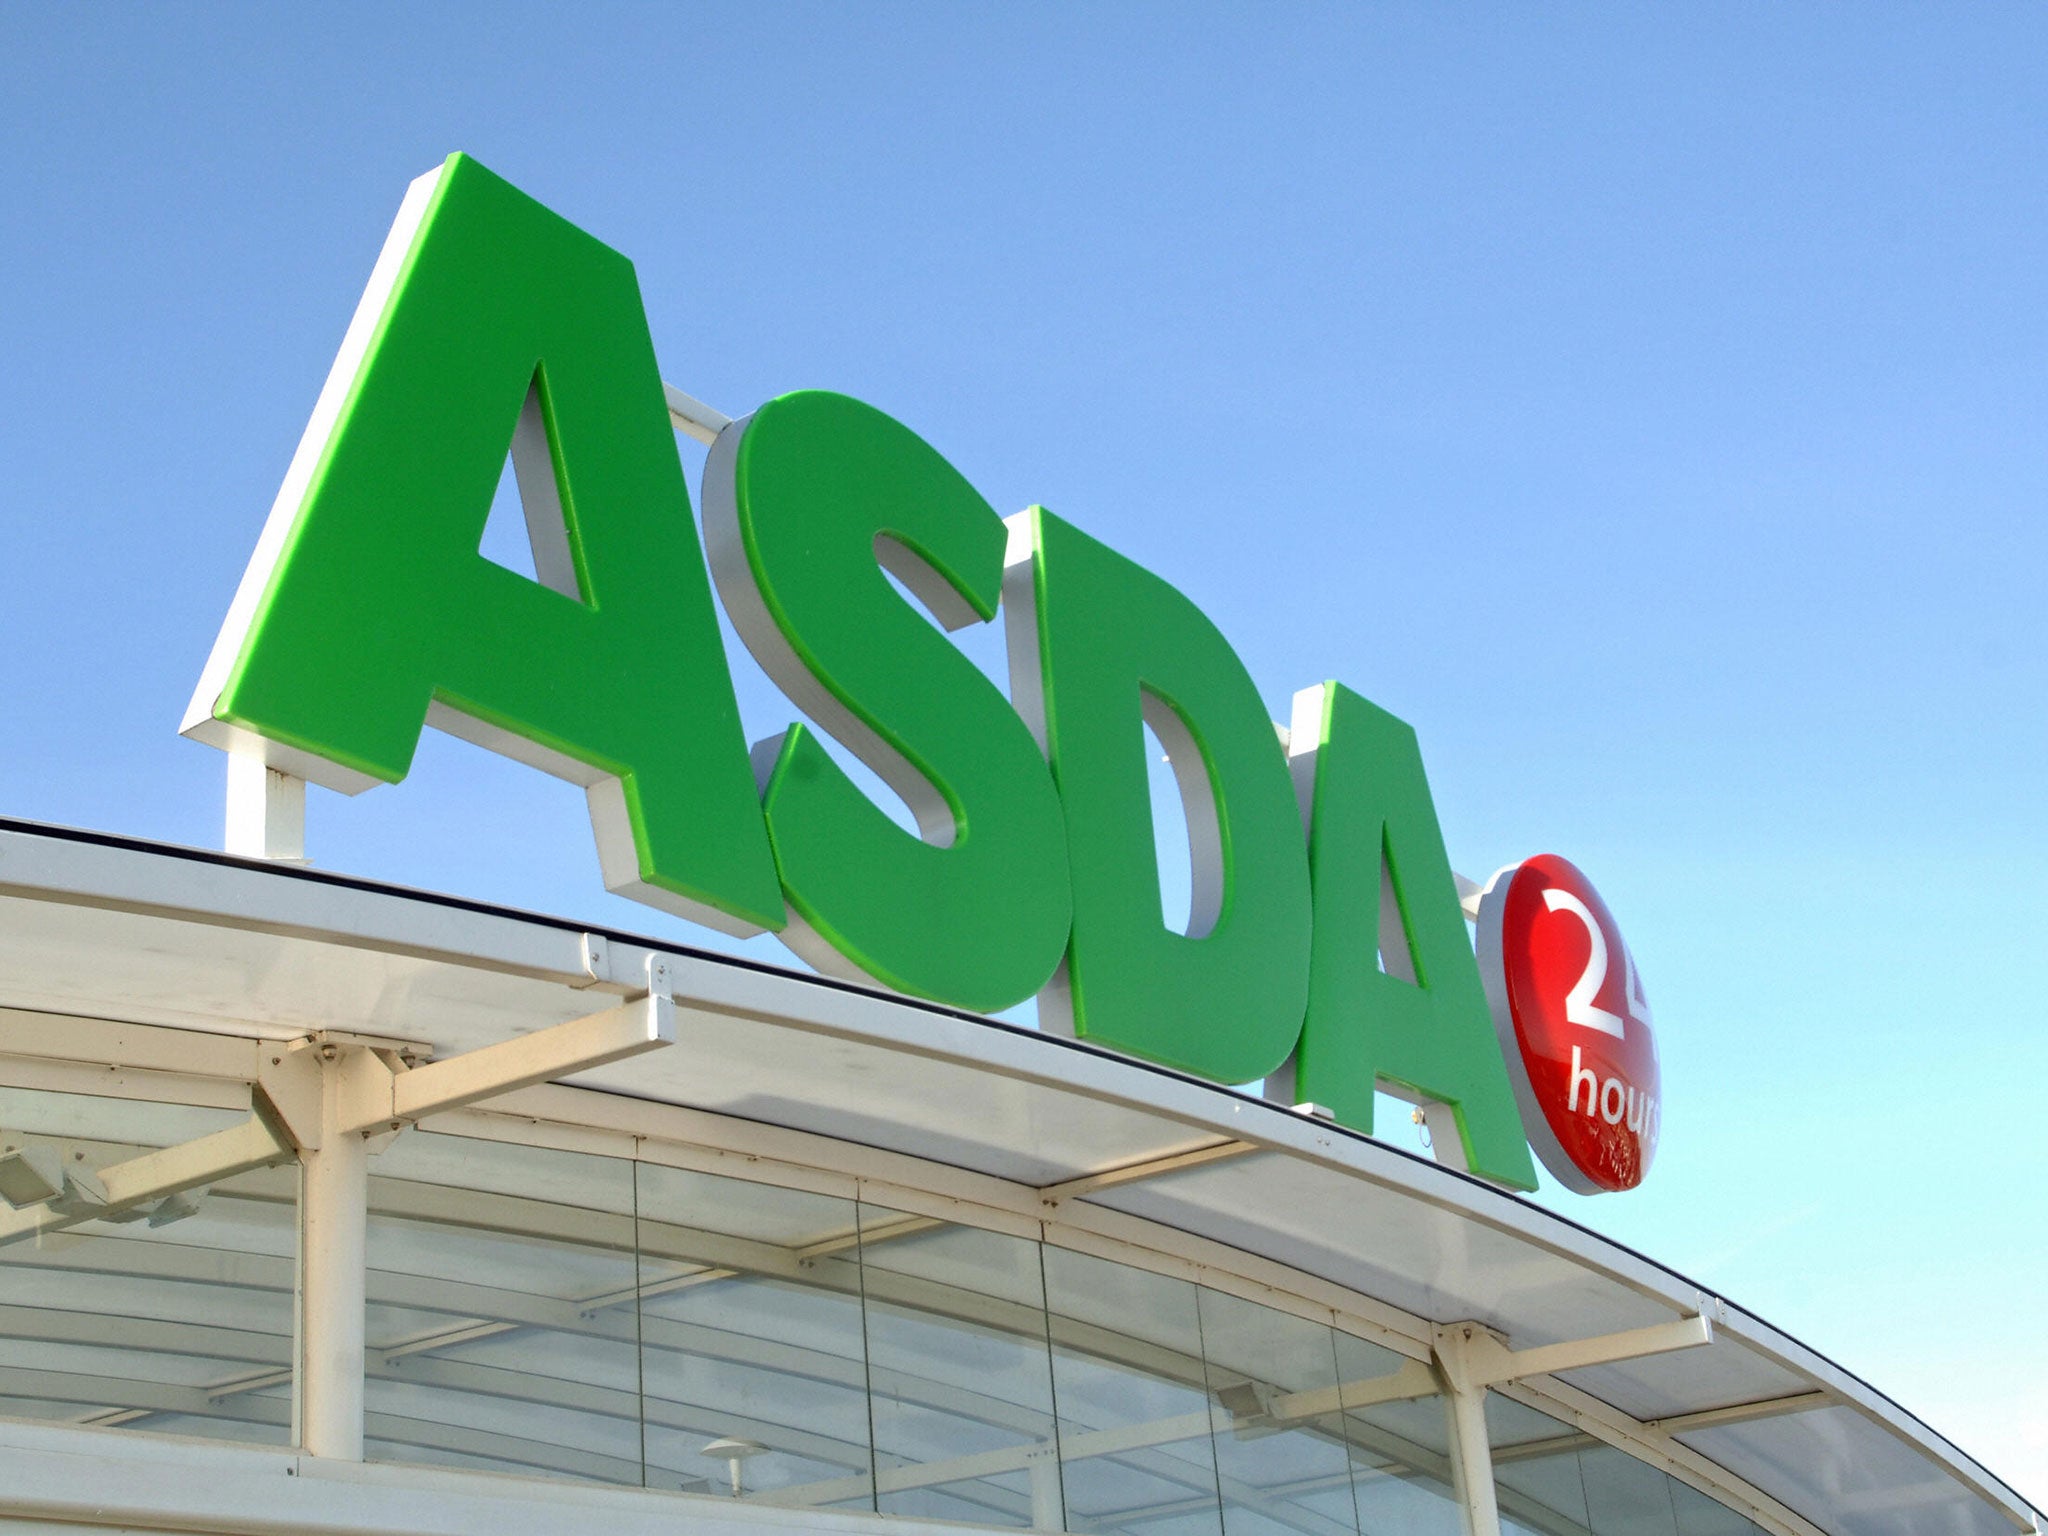 Asda's manager decided to launch 'quiet hour' after seeing a boy with autism struggling to cope on the shop floor